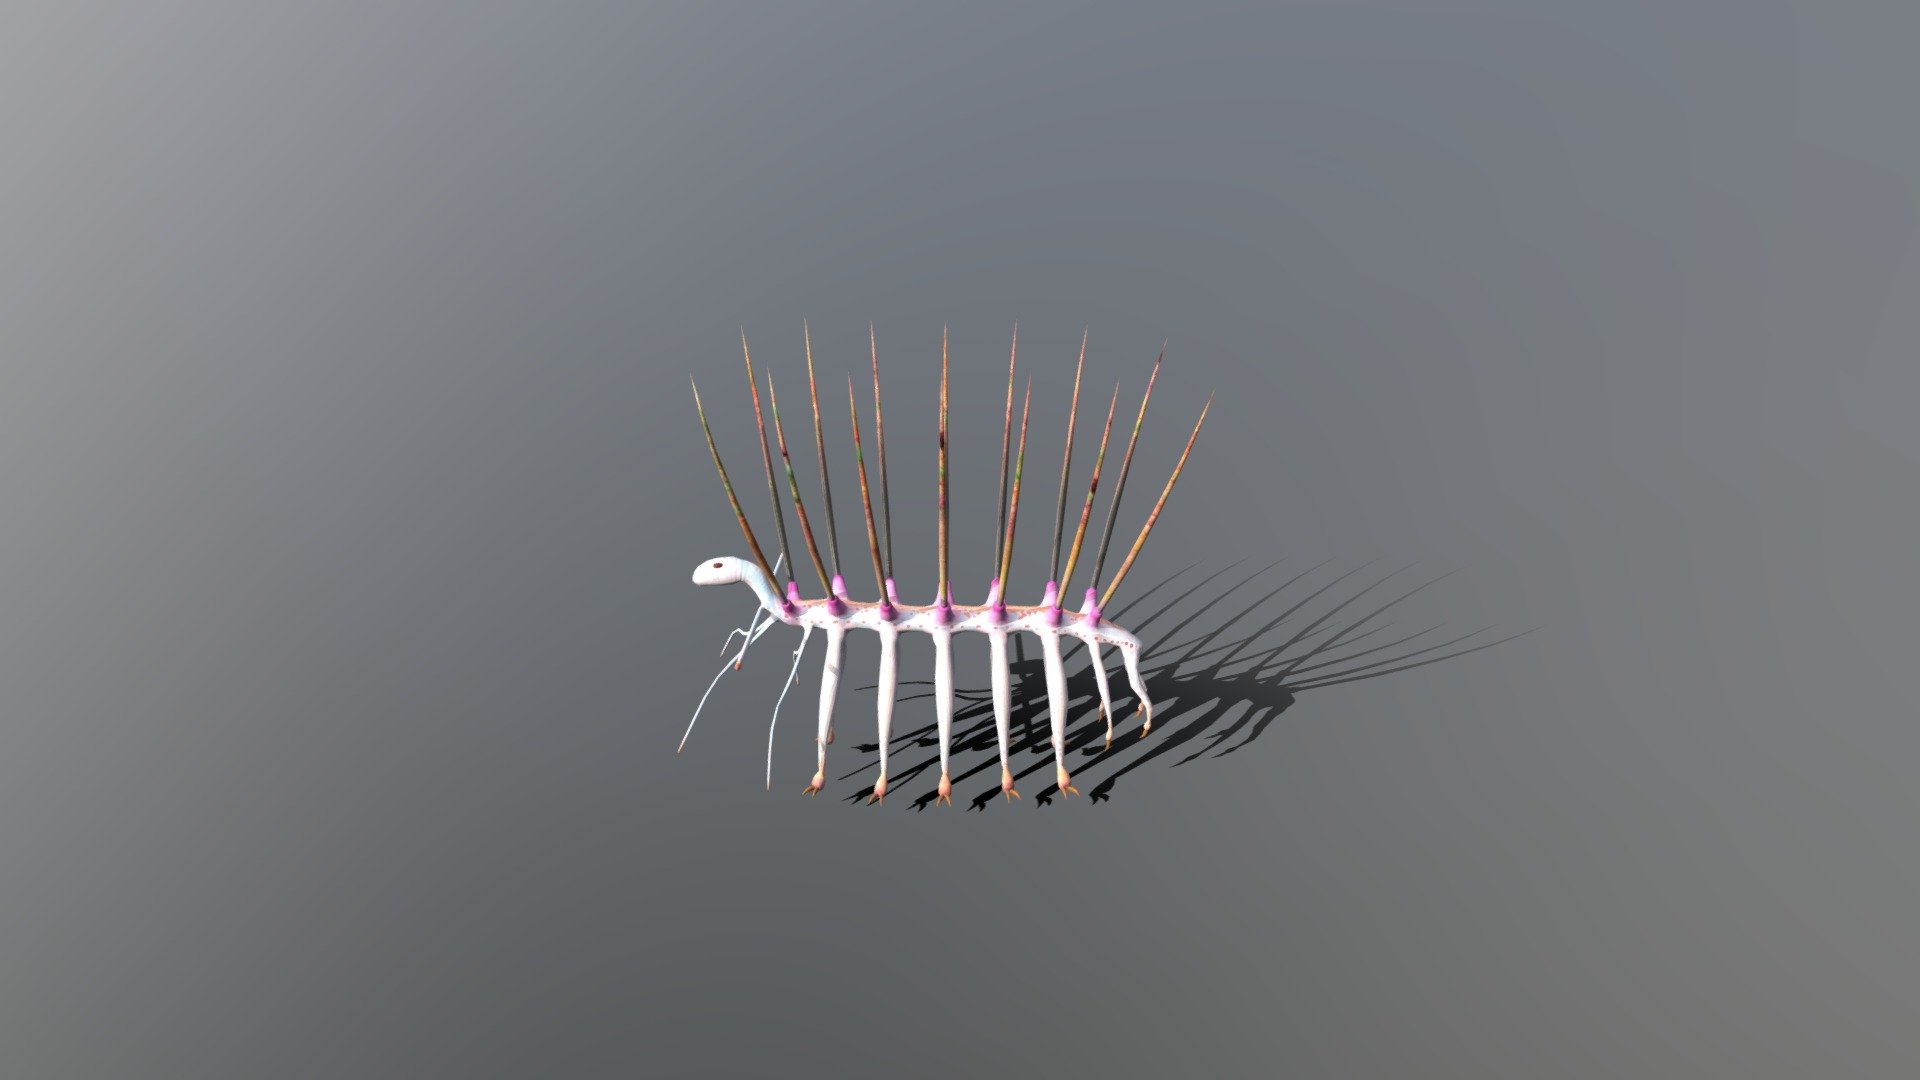 I made Hallucigenia! You can use it as an avatar in VRChat or cluster!
You can download it at Booth! ¥1,000! - Hallucigenia_2_0 - 3D model by カヤ（Kaya） (@hymenoptera0908) 3d model